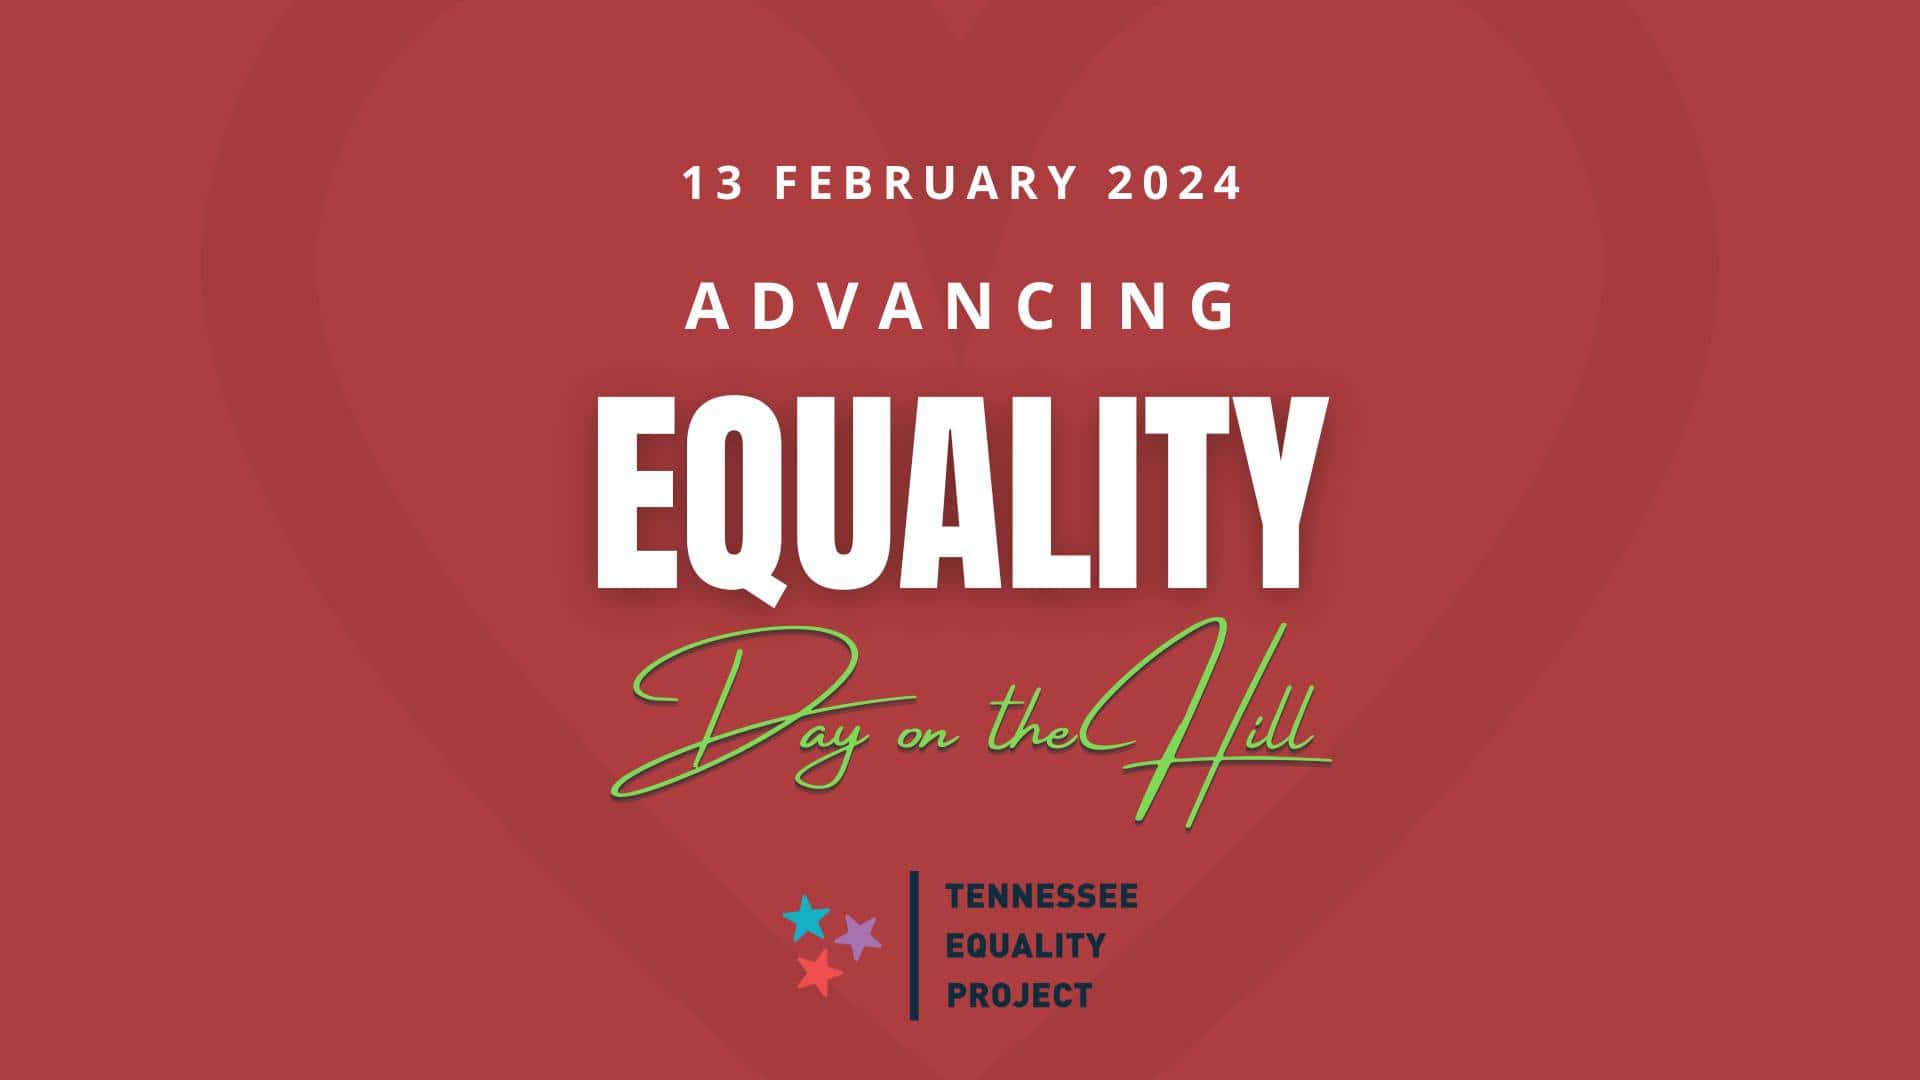 Advancing Equality Day on the Hill - Part 1 343687884 902289897507056 9140497624564581021 n